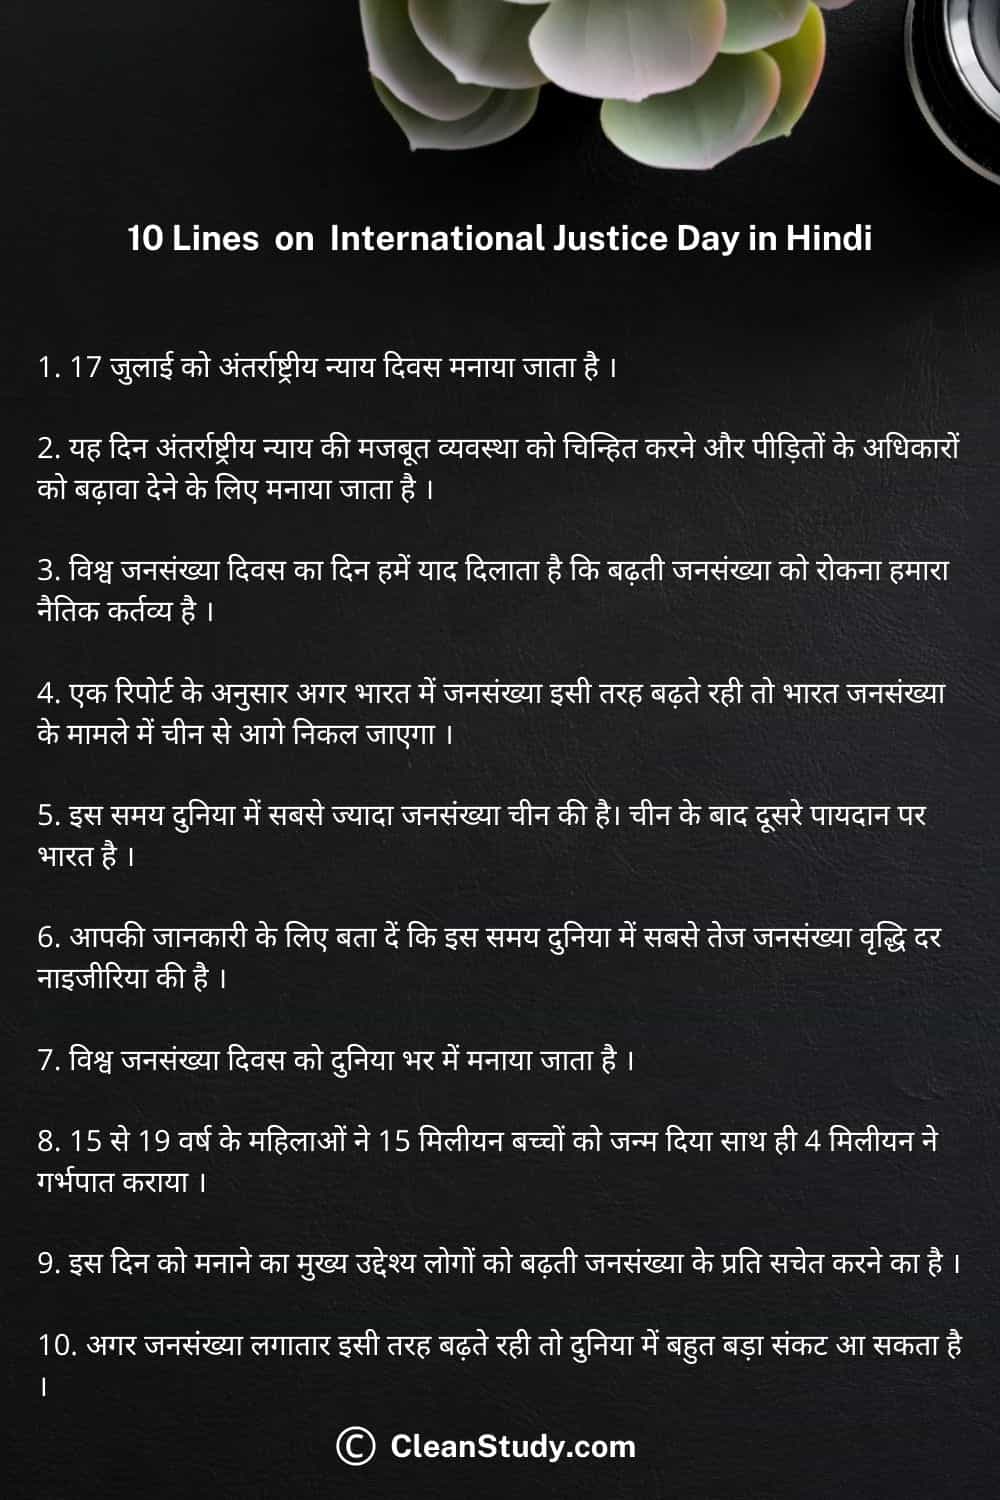 10 lines on international justice day in hindi